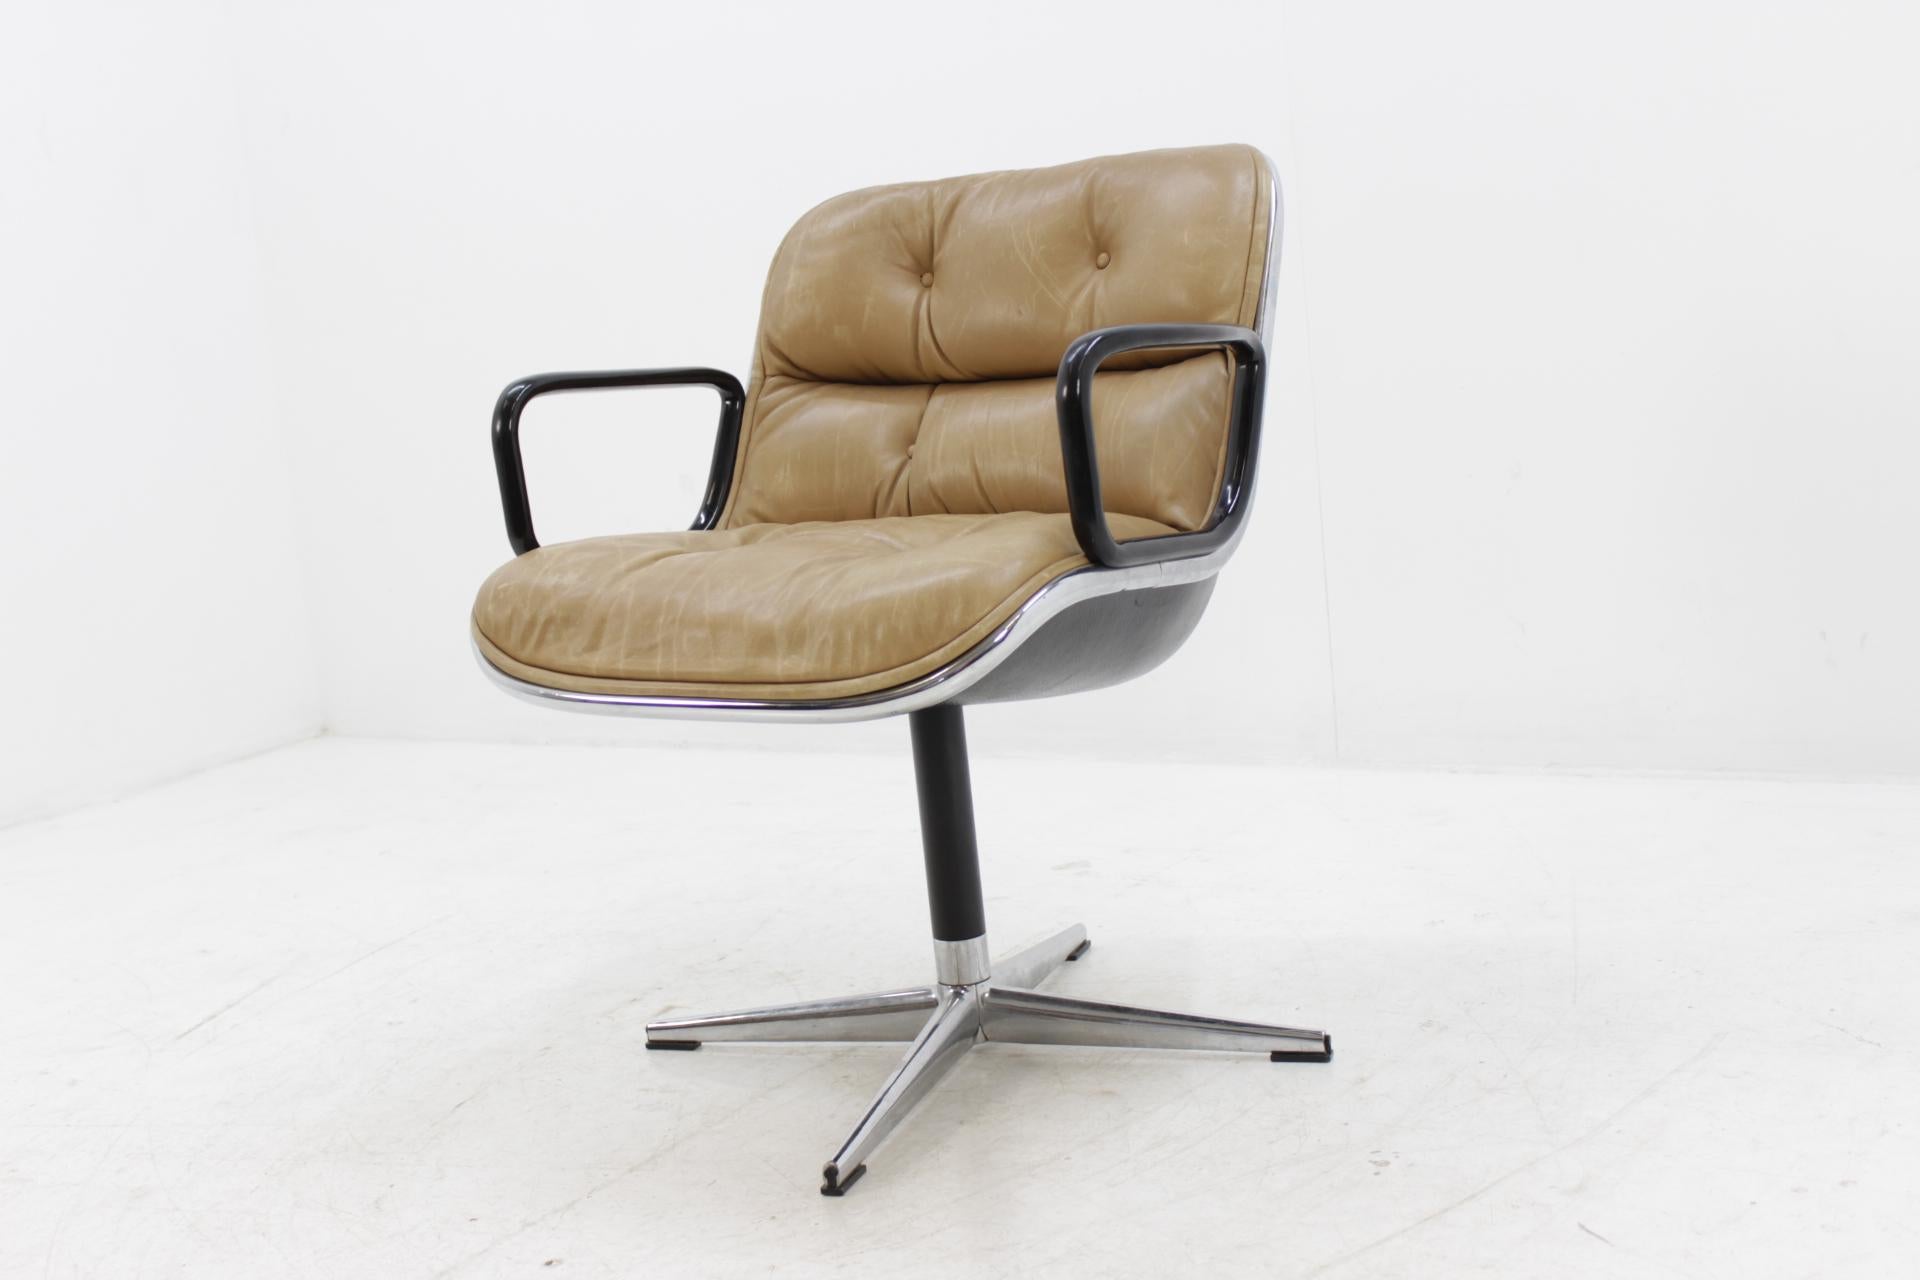 Midcentury leather swivel chair designed by Charles Pollock in very confortable.